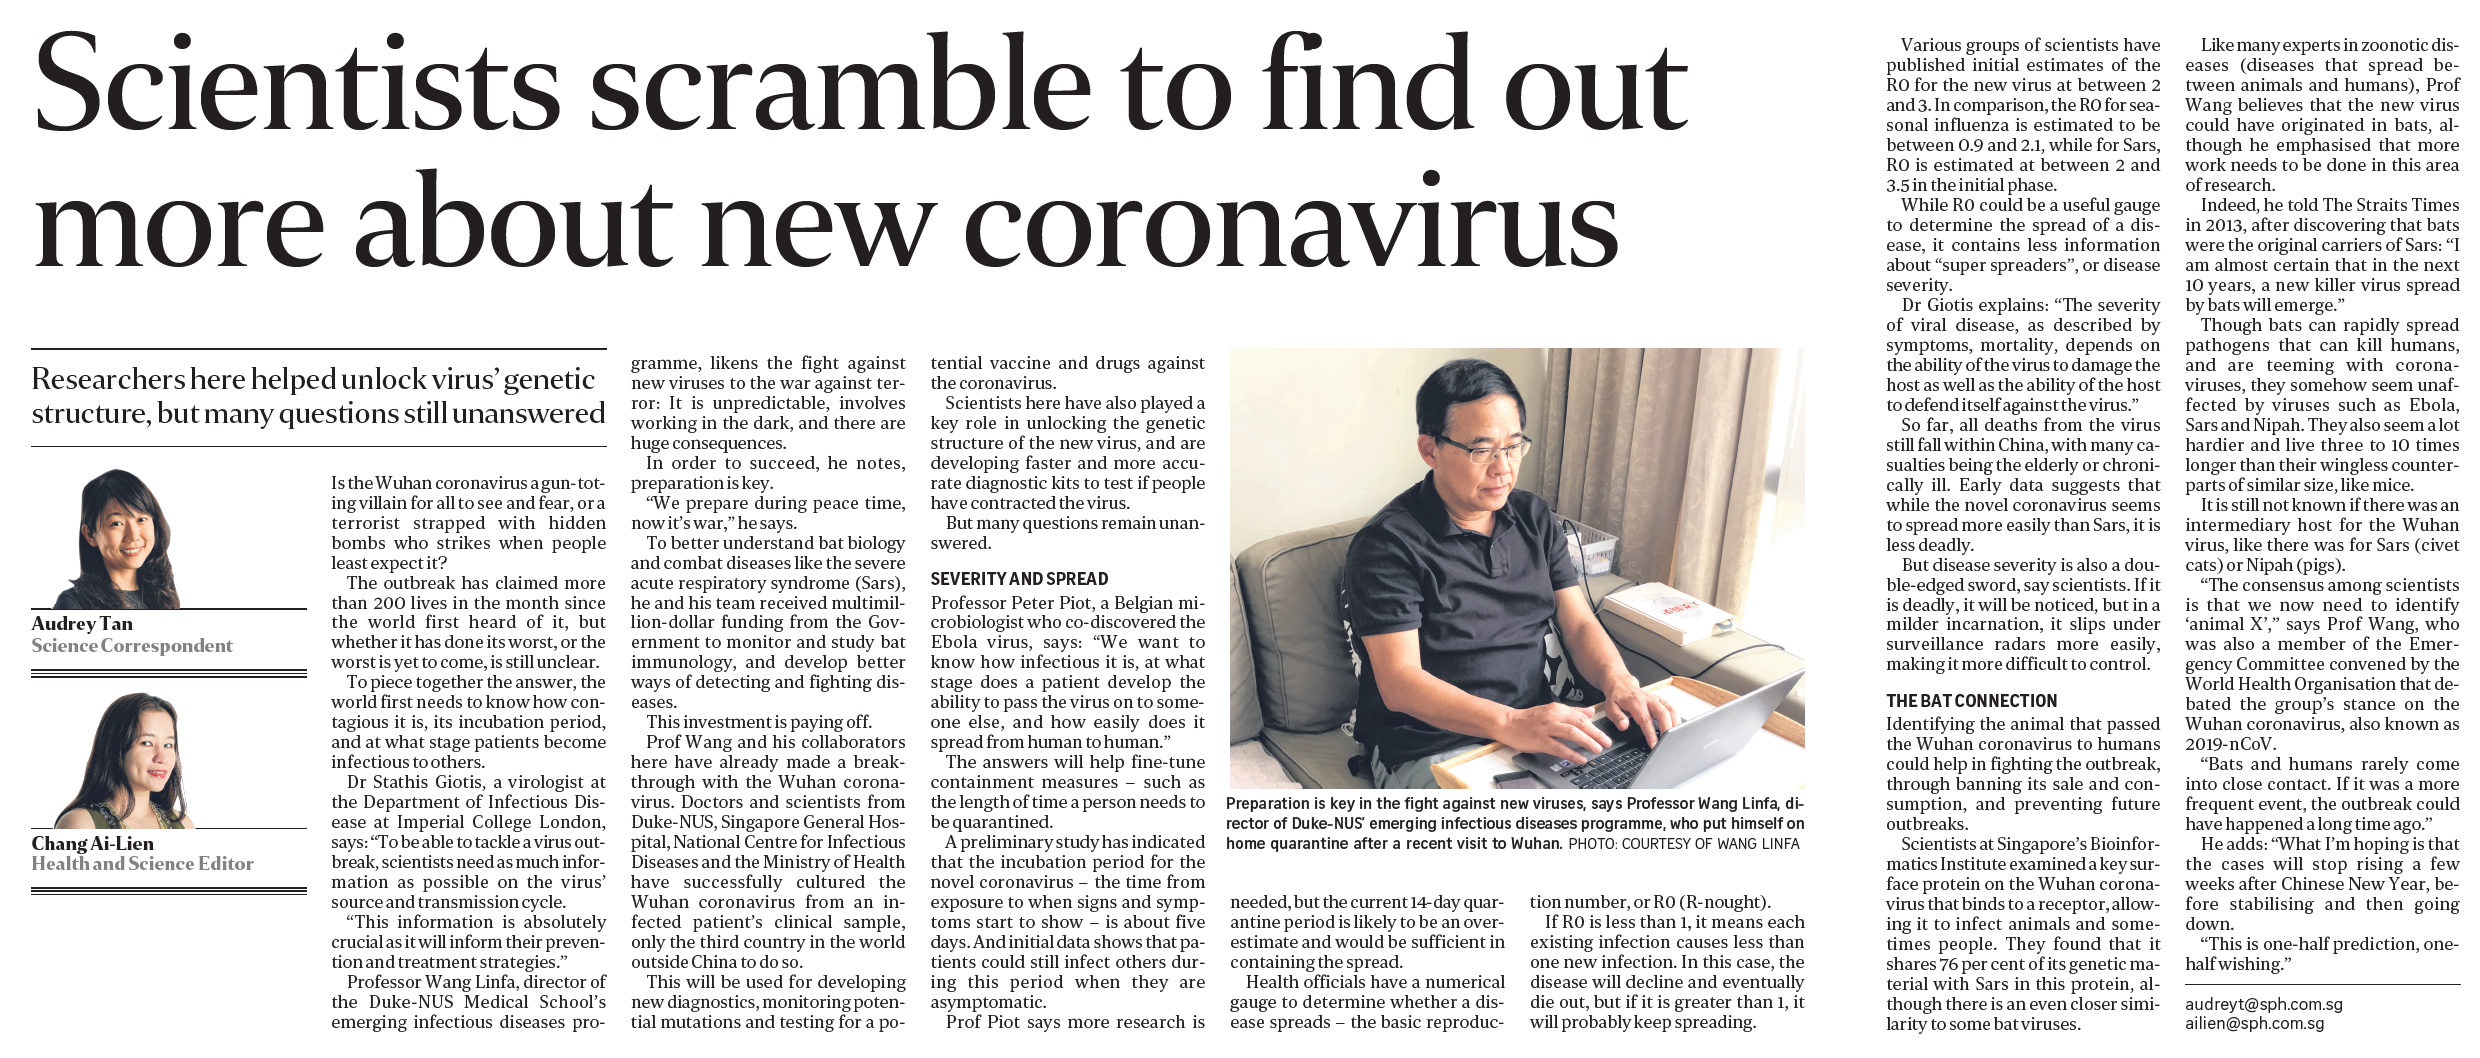 SunTimes, 2 Feb 2020, pB6 - Scientists scramble to find out more about new coronavirus